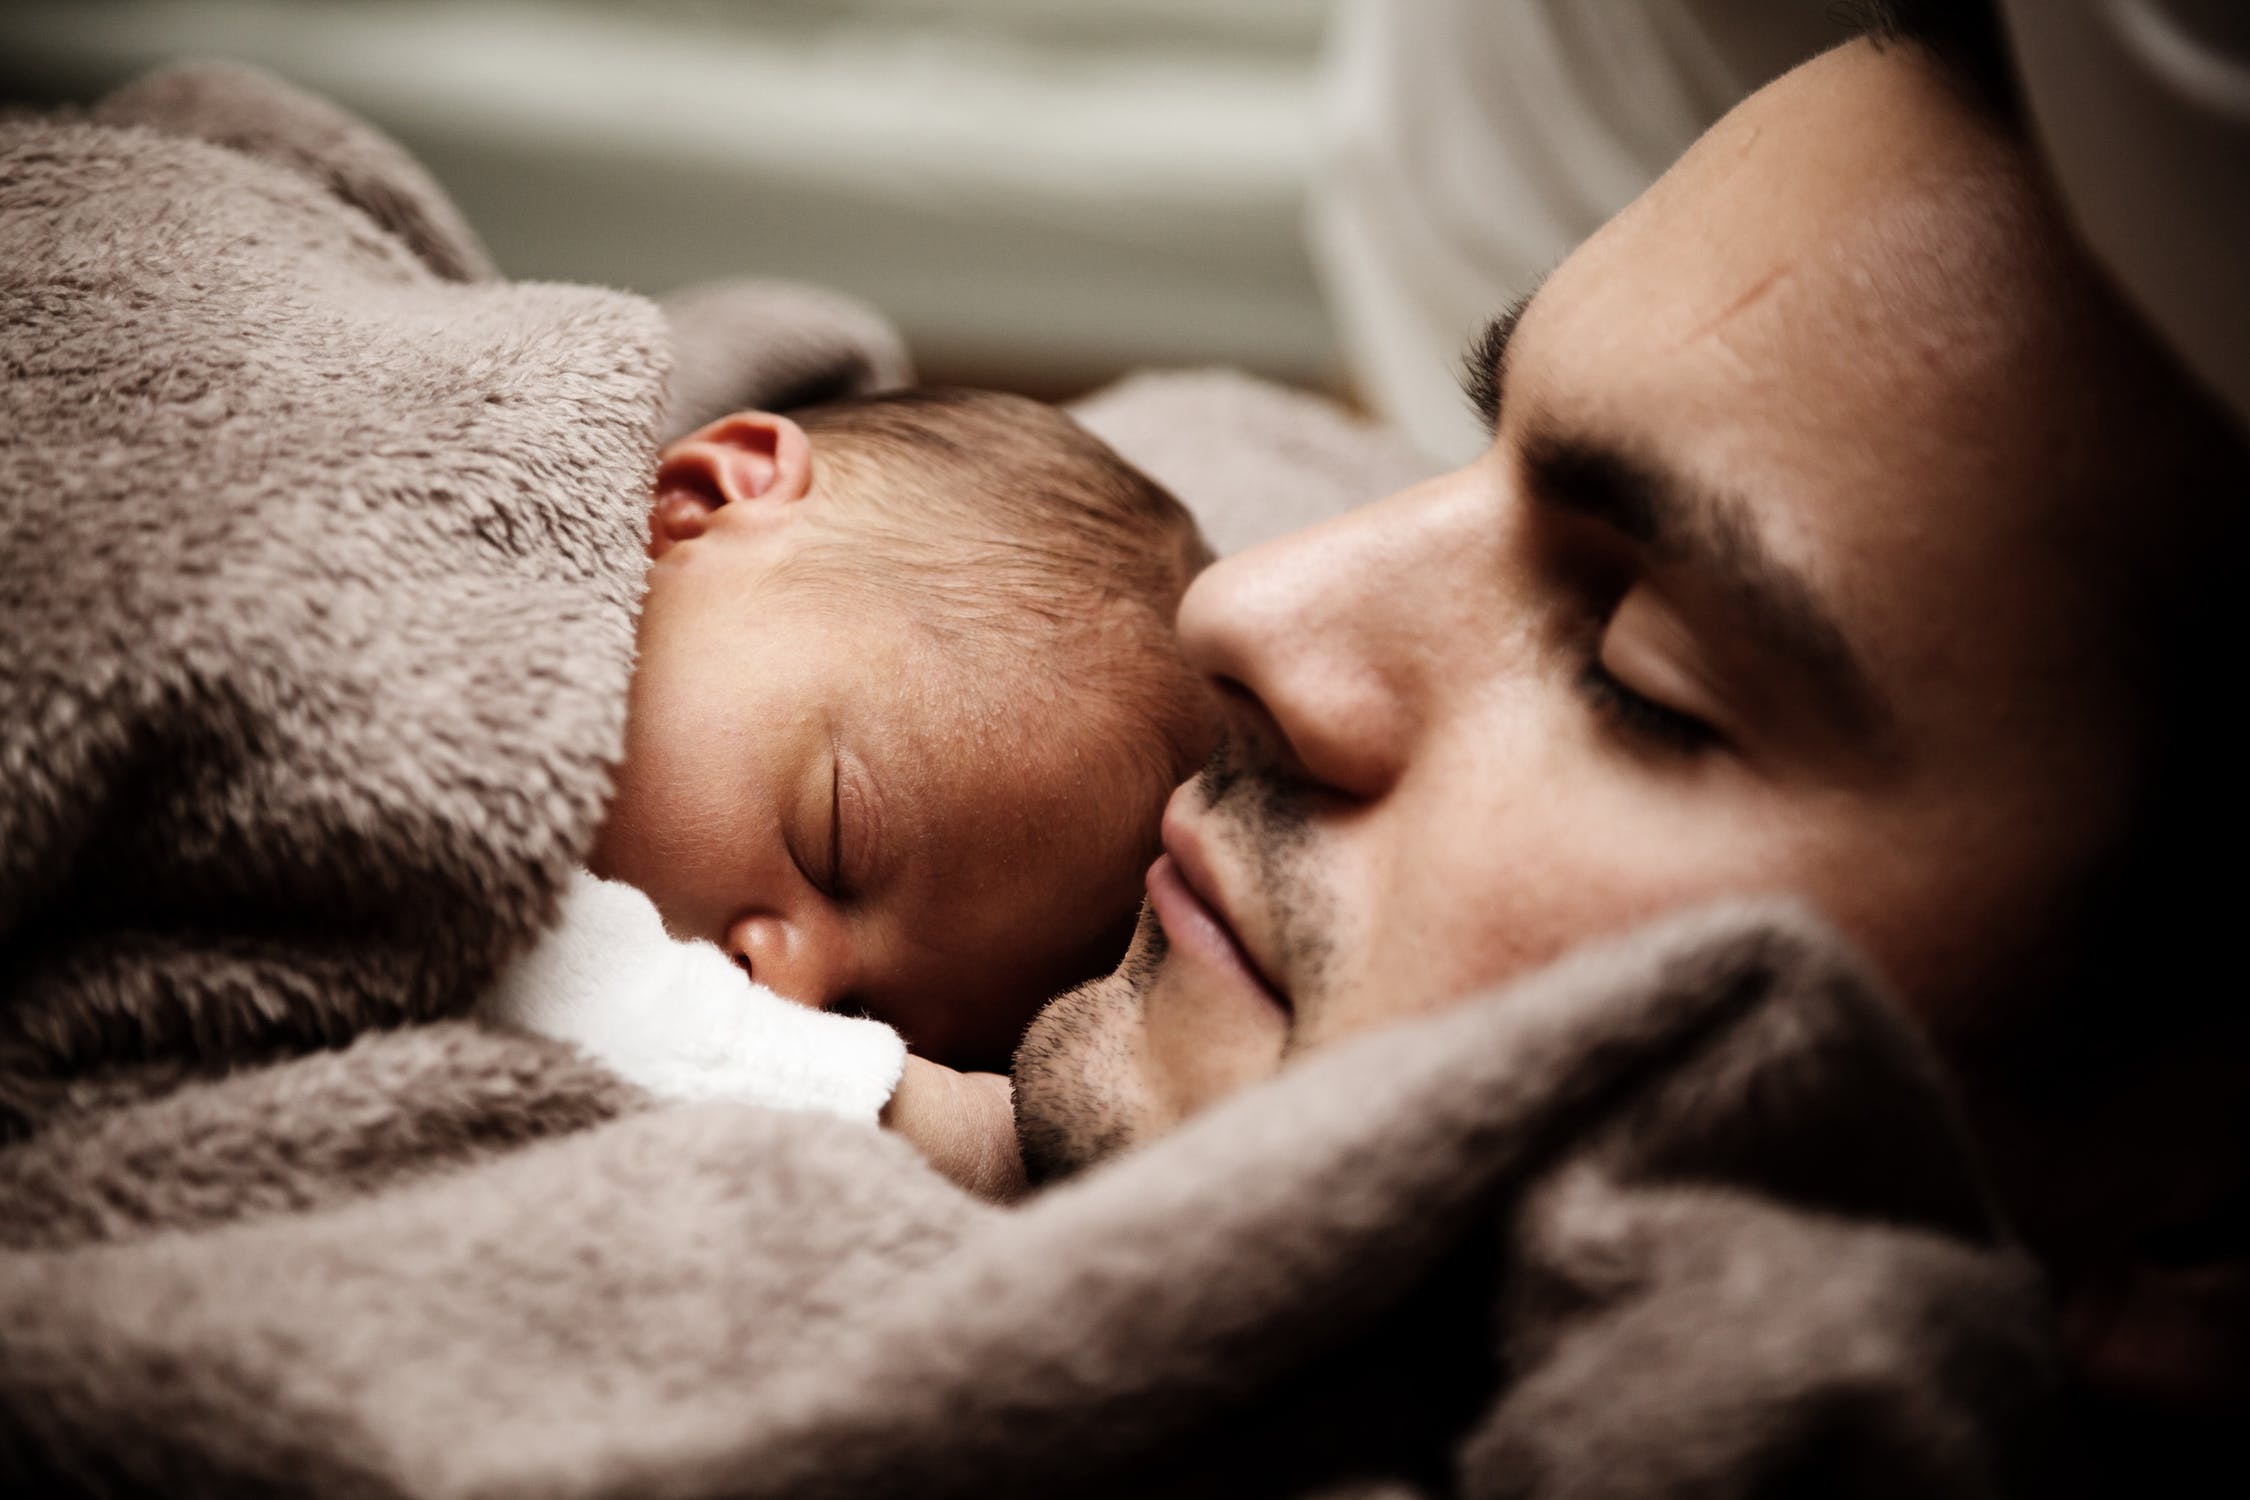 Dave loved my baby | Source: Pexels